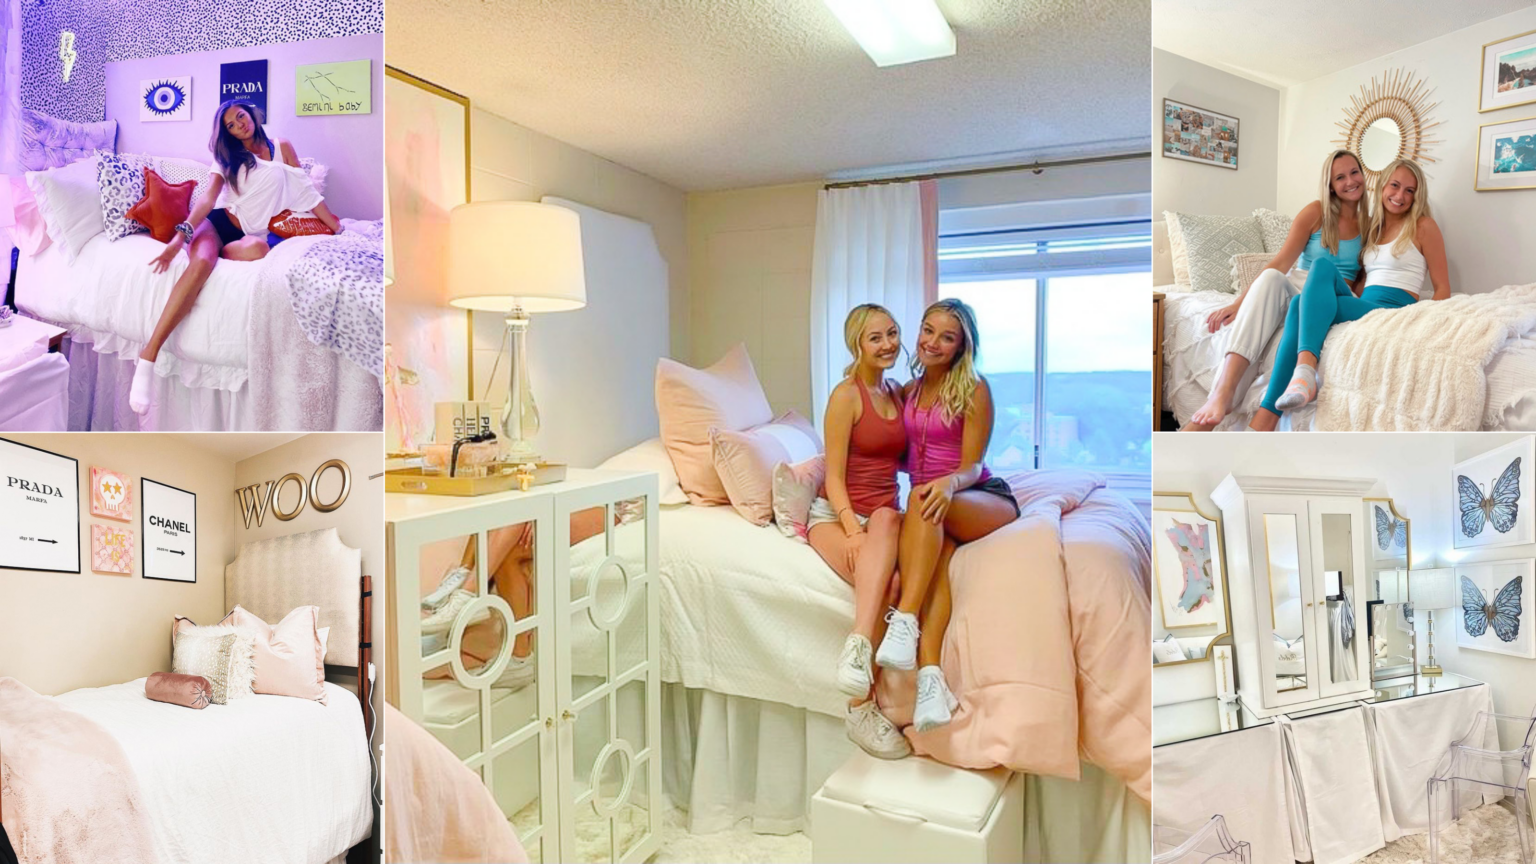 26 Best Dorm Room Ideas That Will Transform Your Room By Sophia Lee 